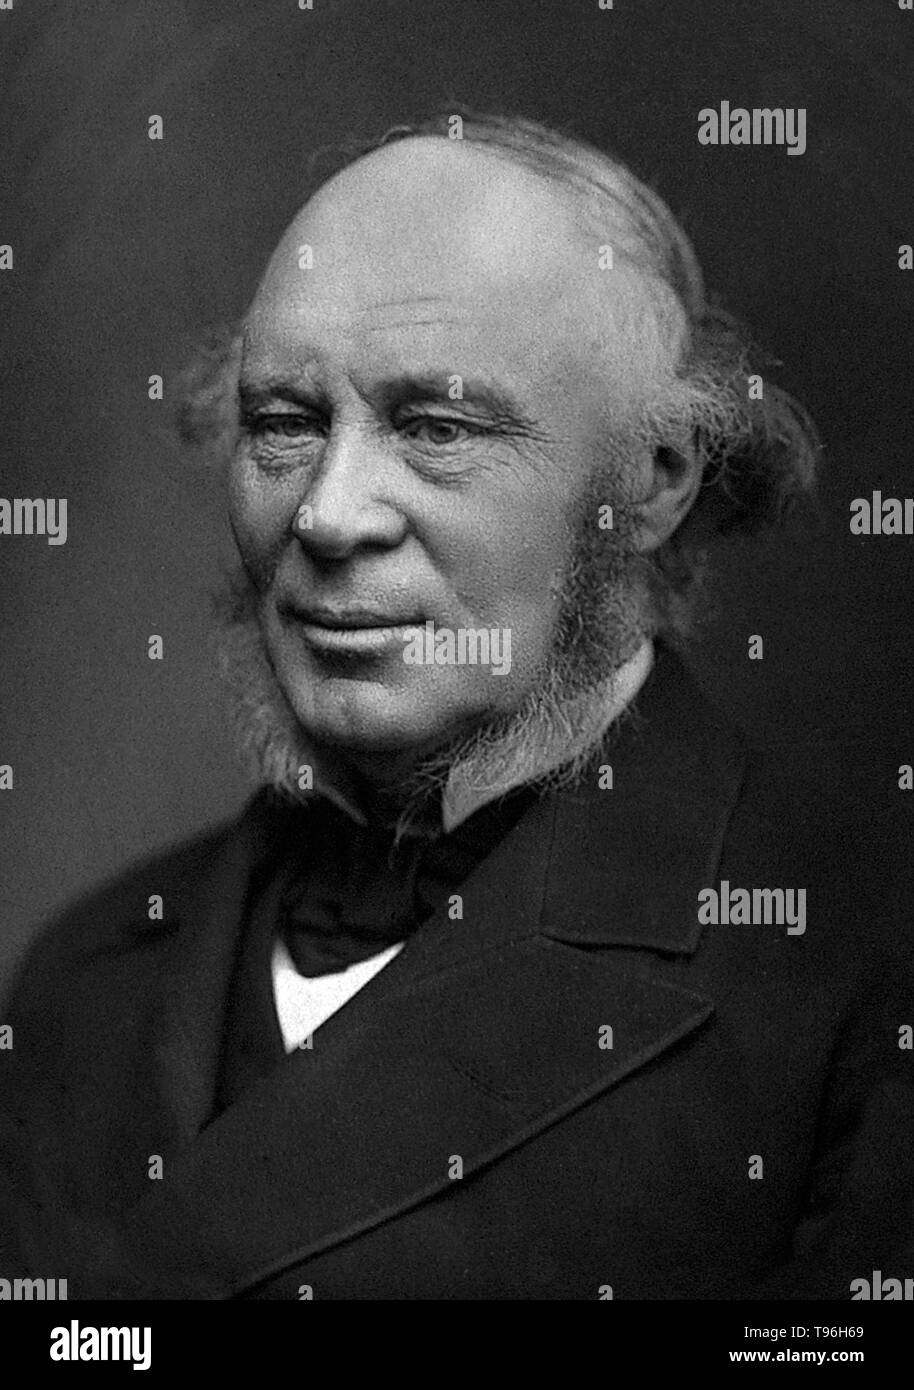 John Fowler, 1st Baronet (July 15, 1817 - November 20, 1898) was an English civil engineer specializing in the construction of railways and railway infrastructure. In the 1850s and 1860s, he was engineer for the world's first underground railway, London's Metropolitan Railway, built by the cut-and-cover method under city streets. In the 1880s, he was chief engineer for the Forth Railway Bridge, which opened in 1890. Fowler's was a long and eminent career, spanning most of the 19th century's railway expansion, and he was engineer, adviser or consultant to many British and foreign railway compan Stock Photo